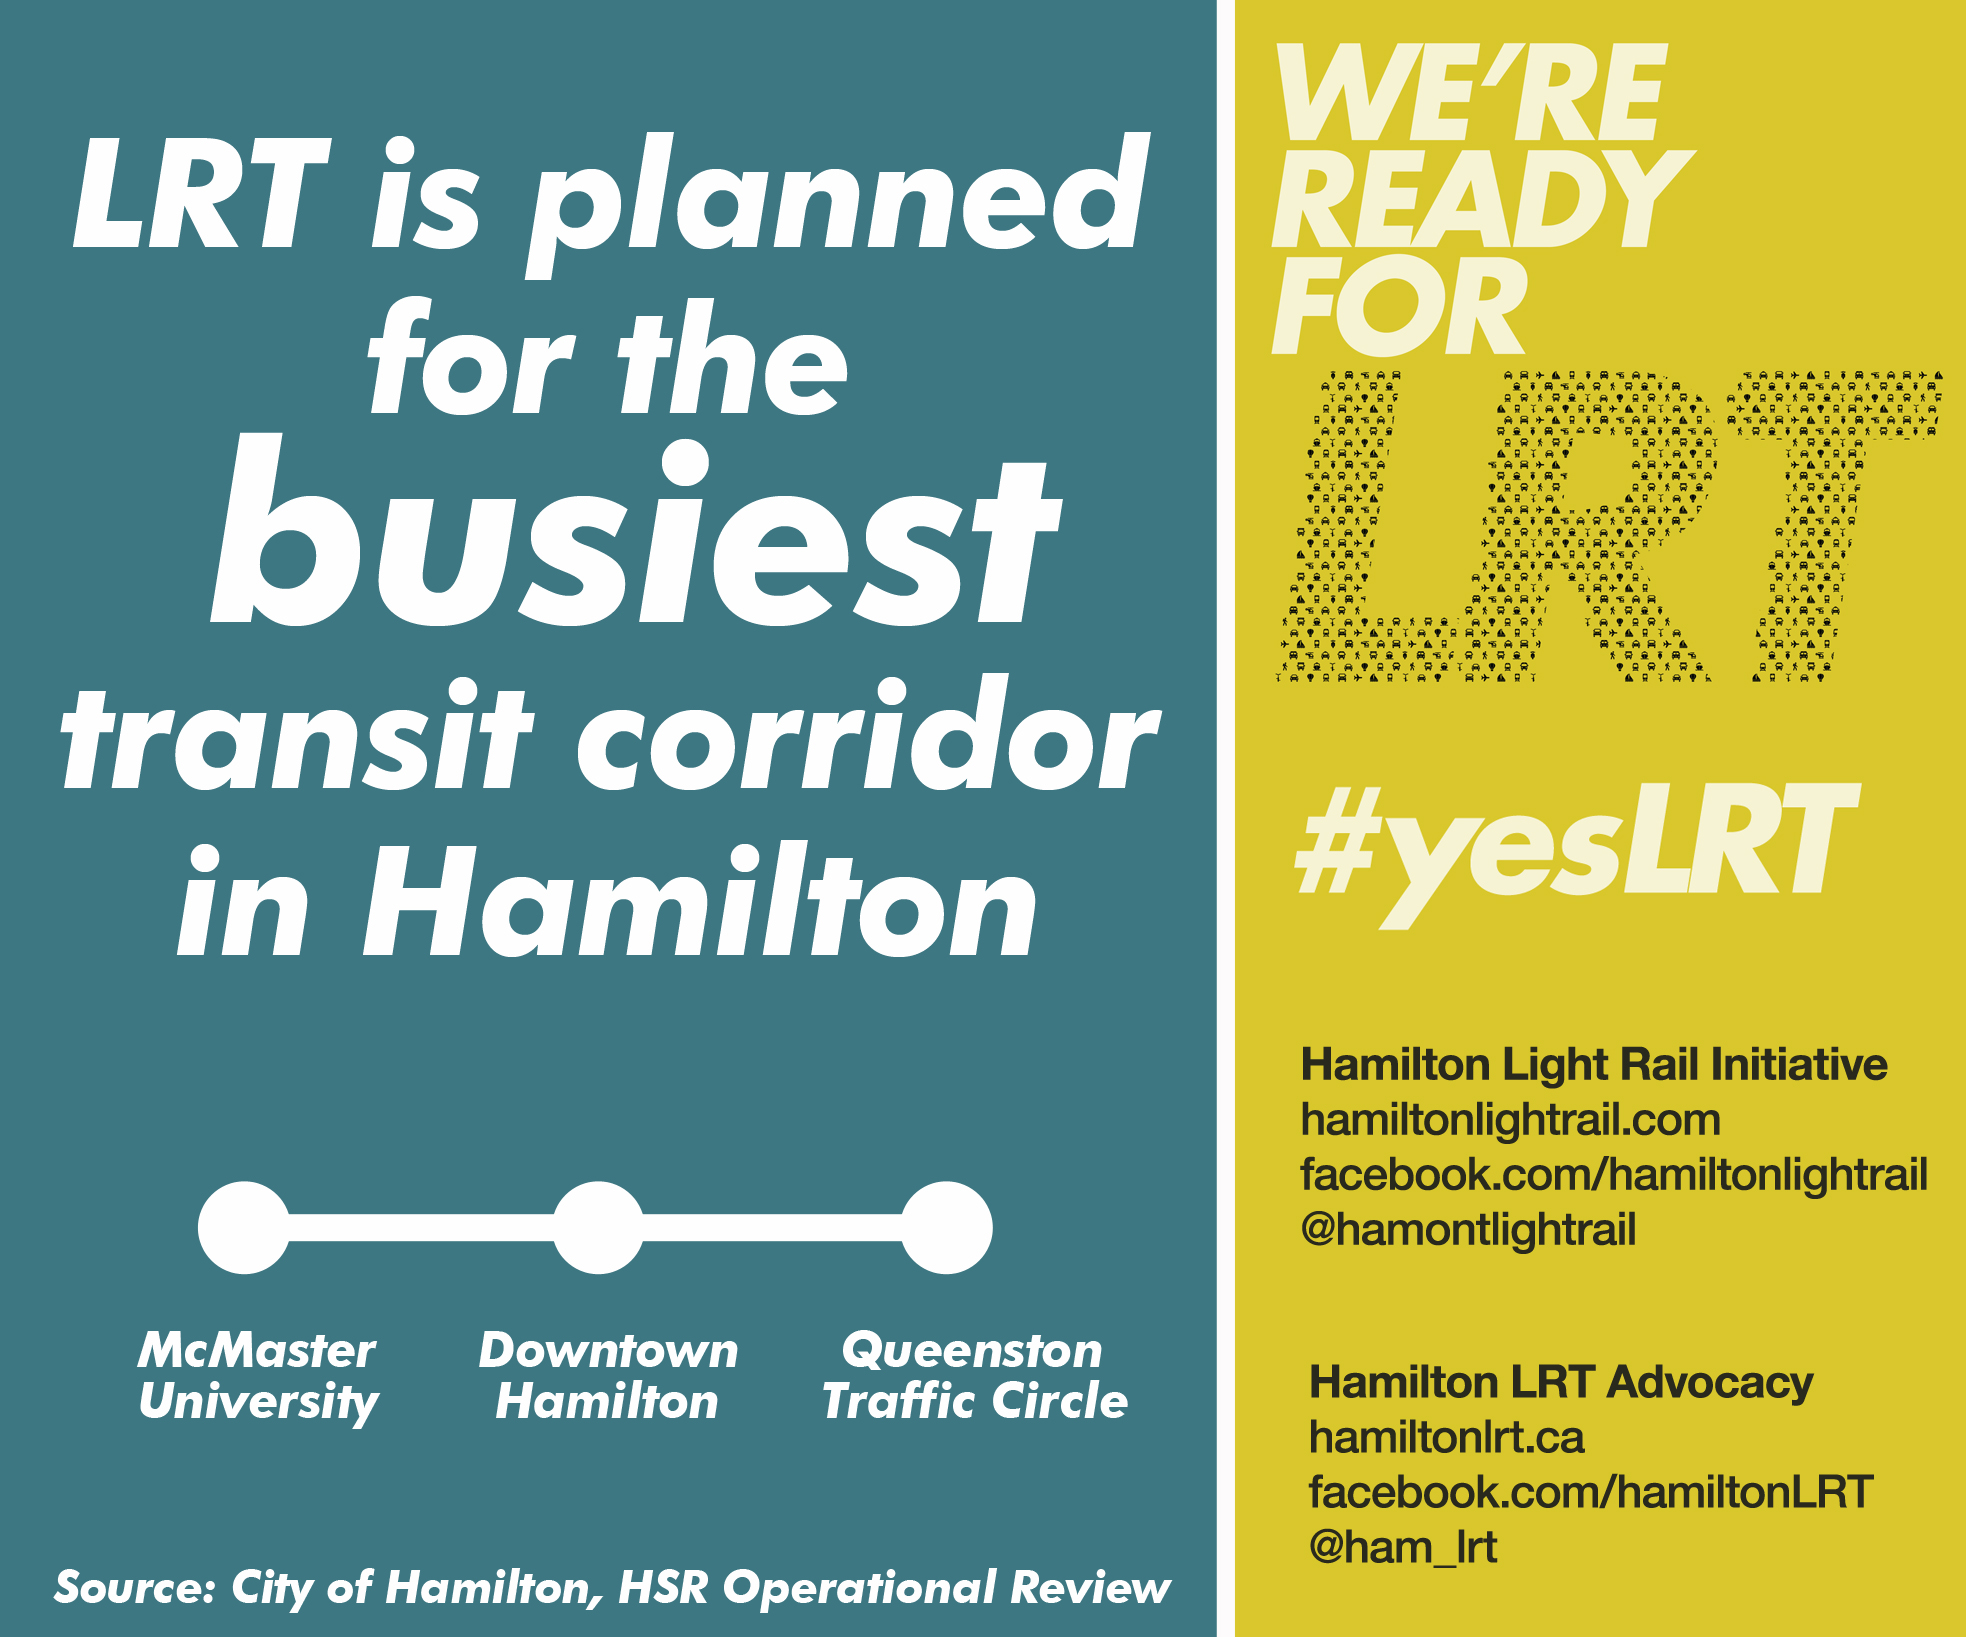 LRT is planned for the busiest transit corridor in Hamilton.